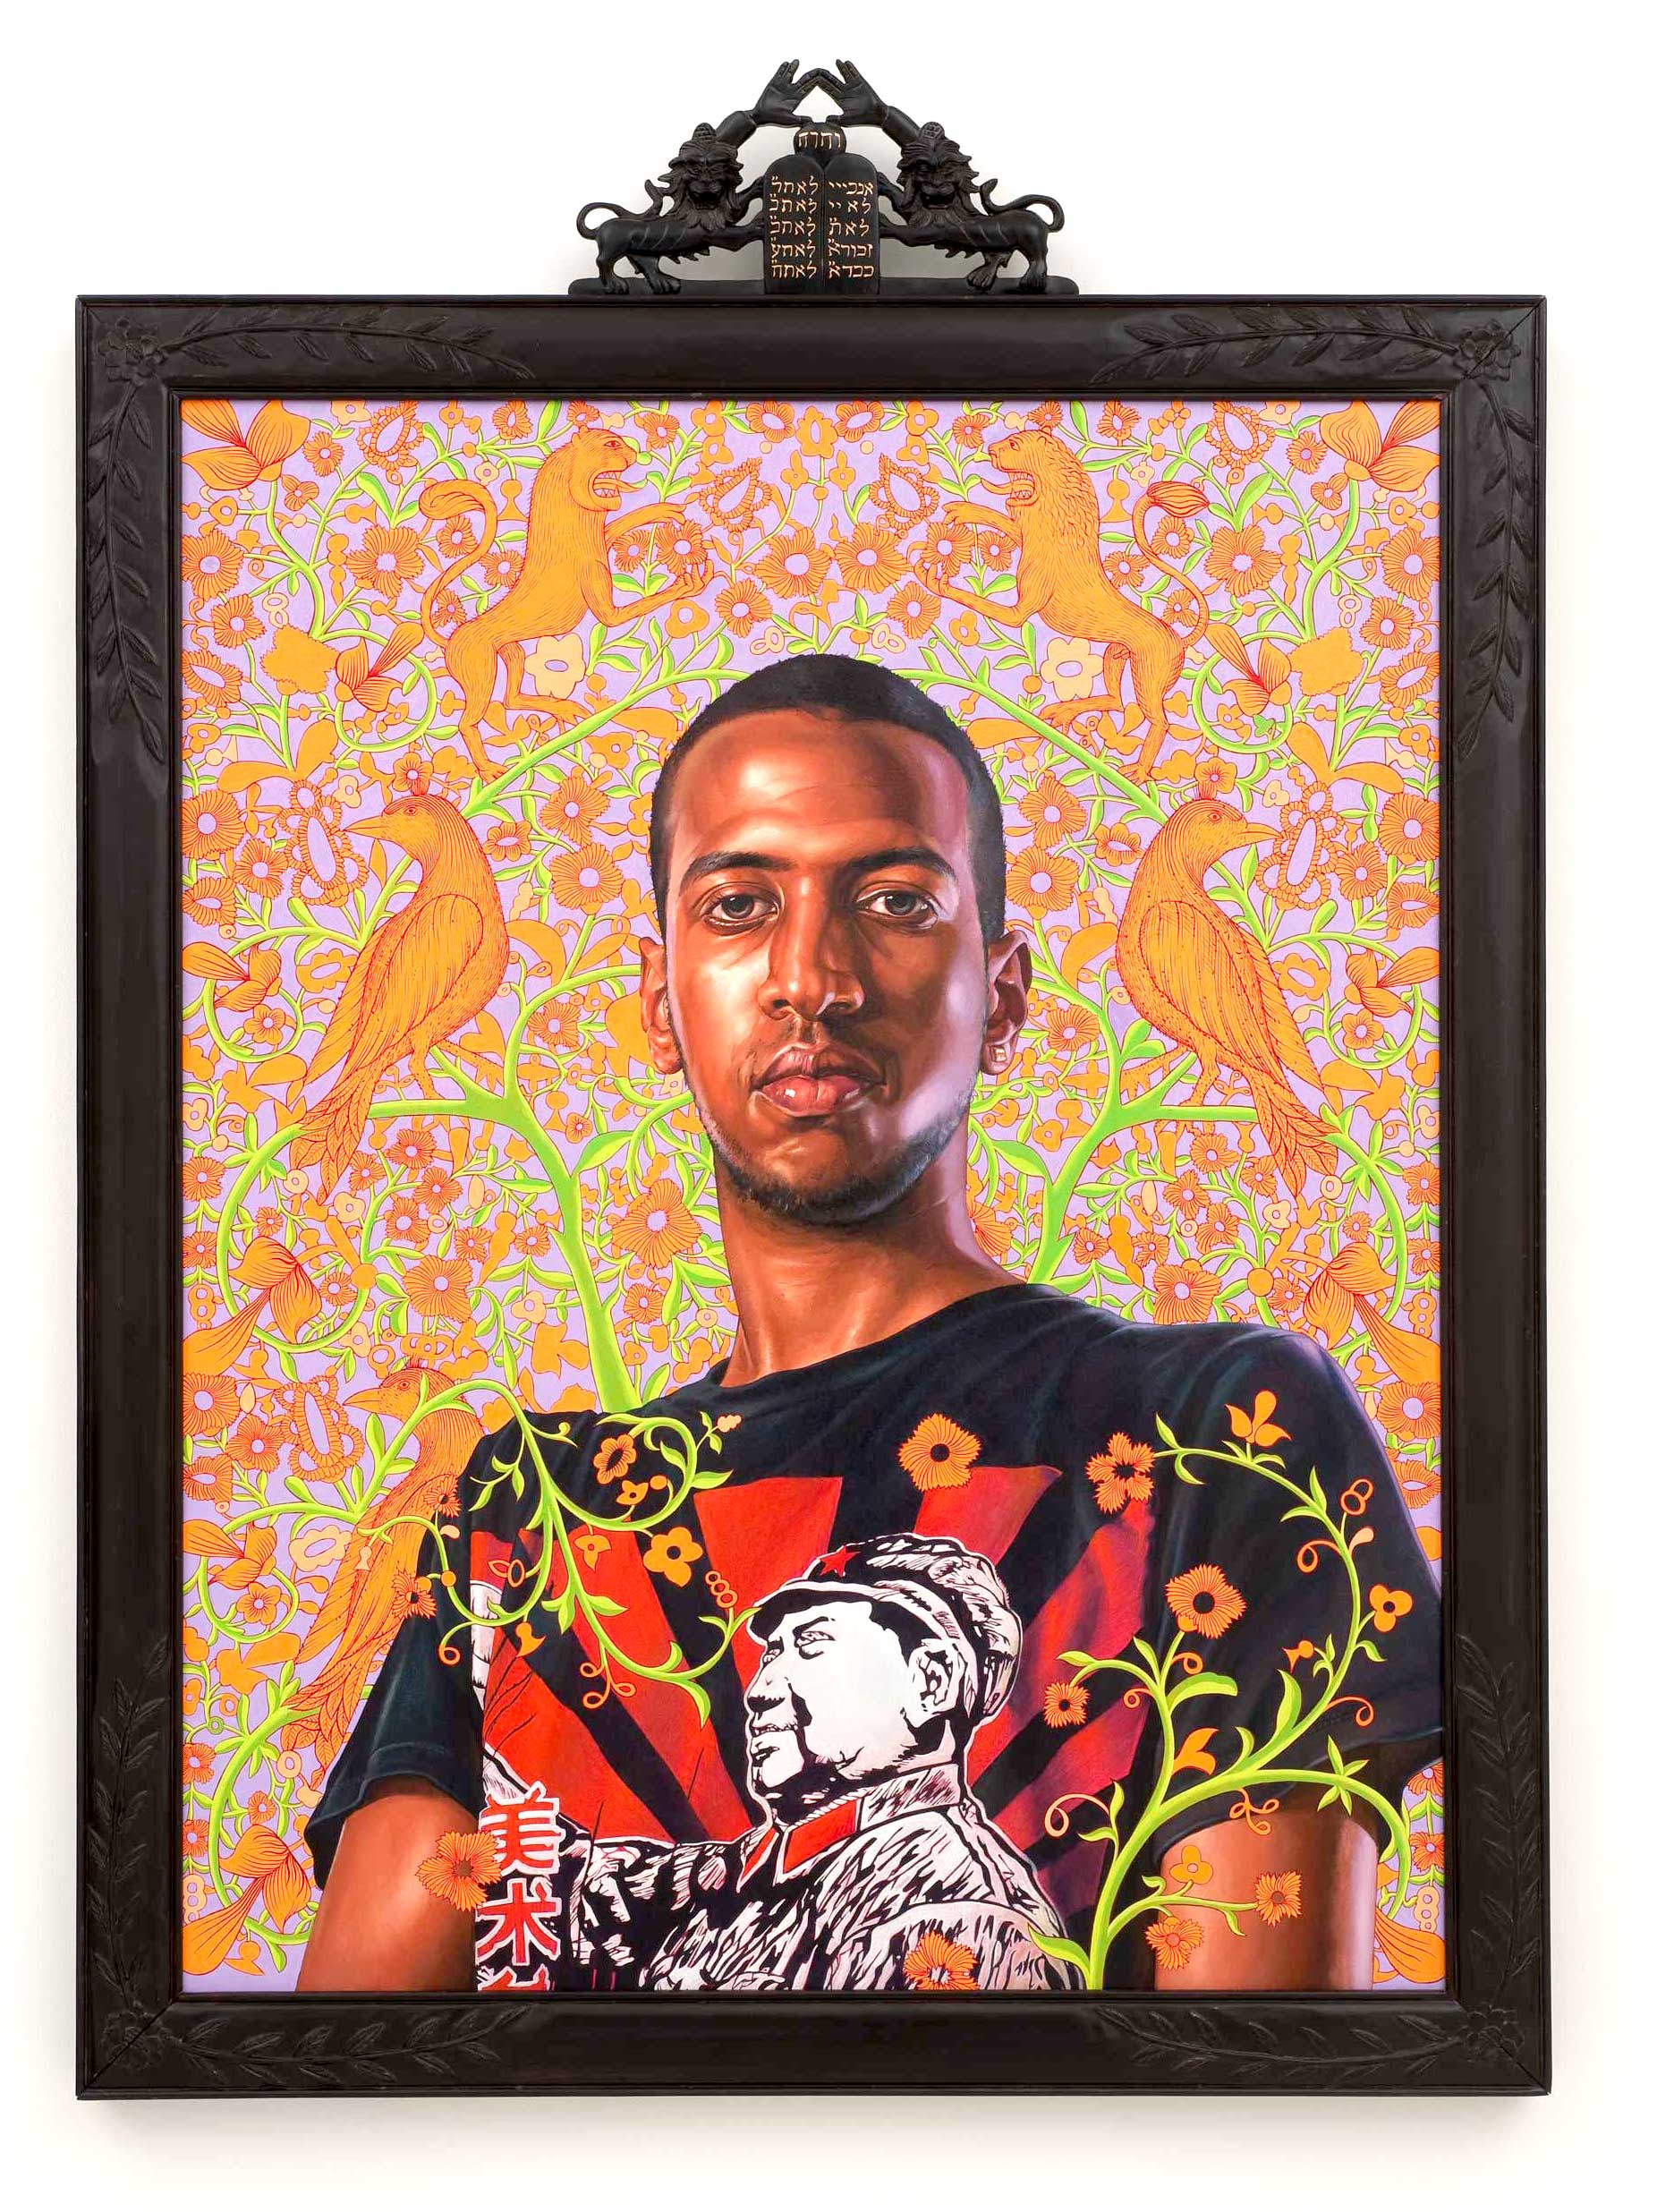 Kehinde Wiley | The World Stage: Israel | Shmuel Yosef, 2011 Oil on Canvas.  | 11